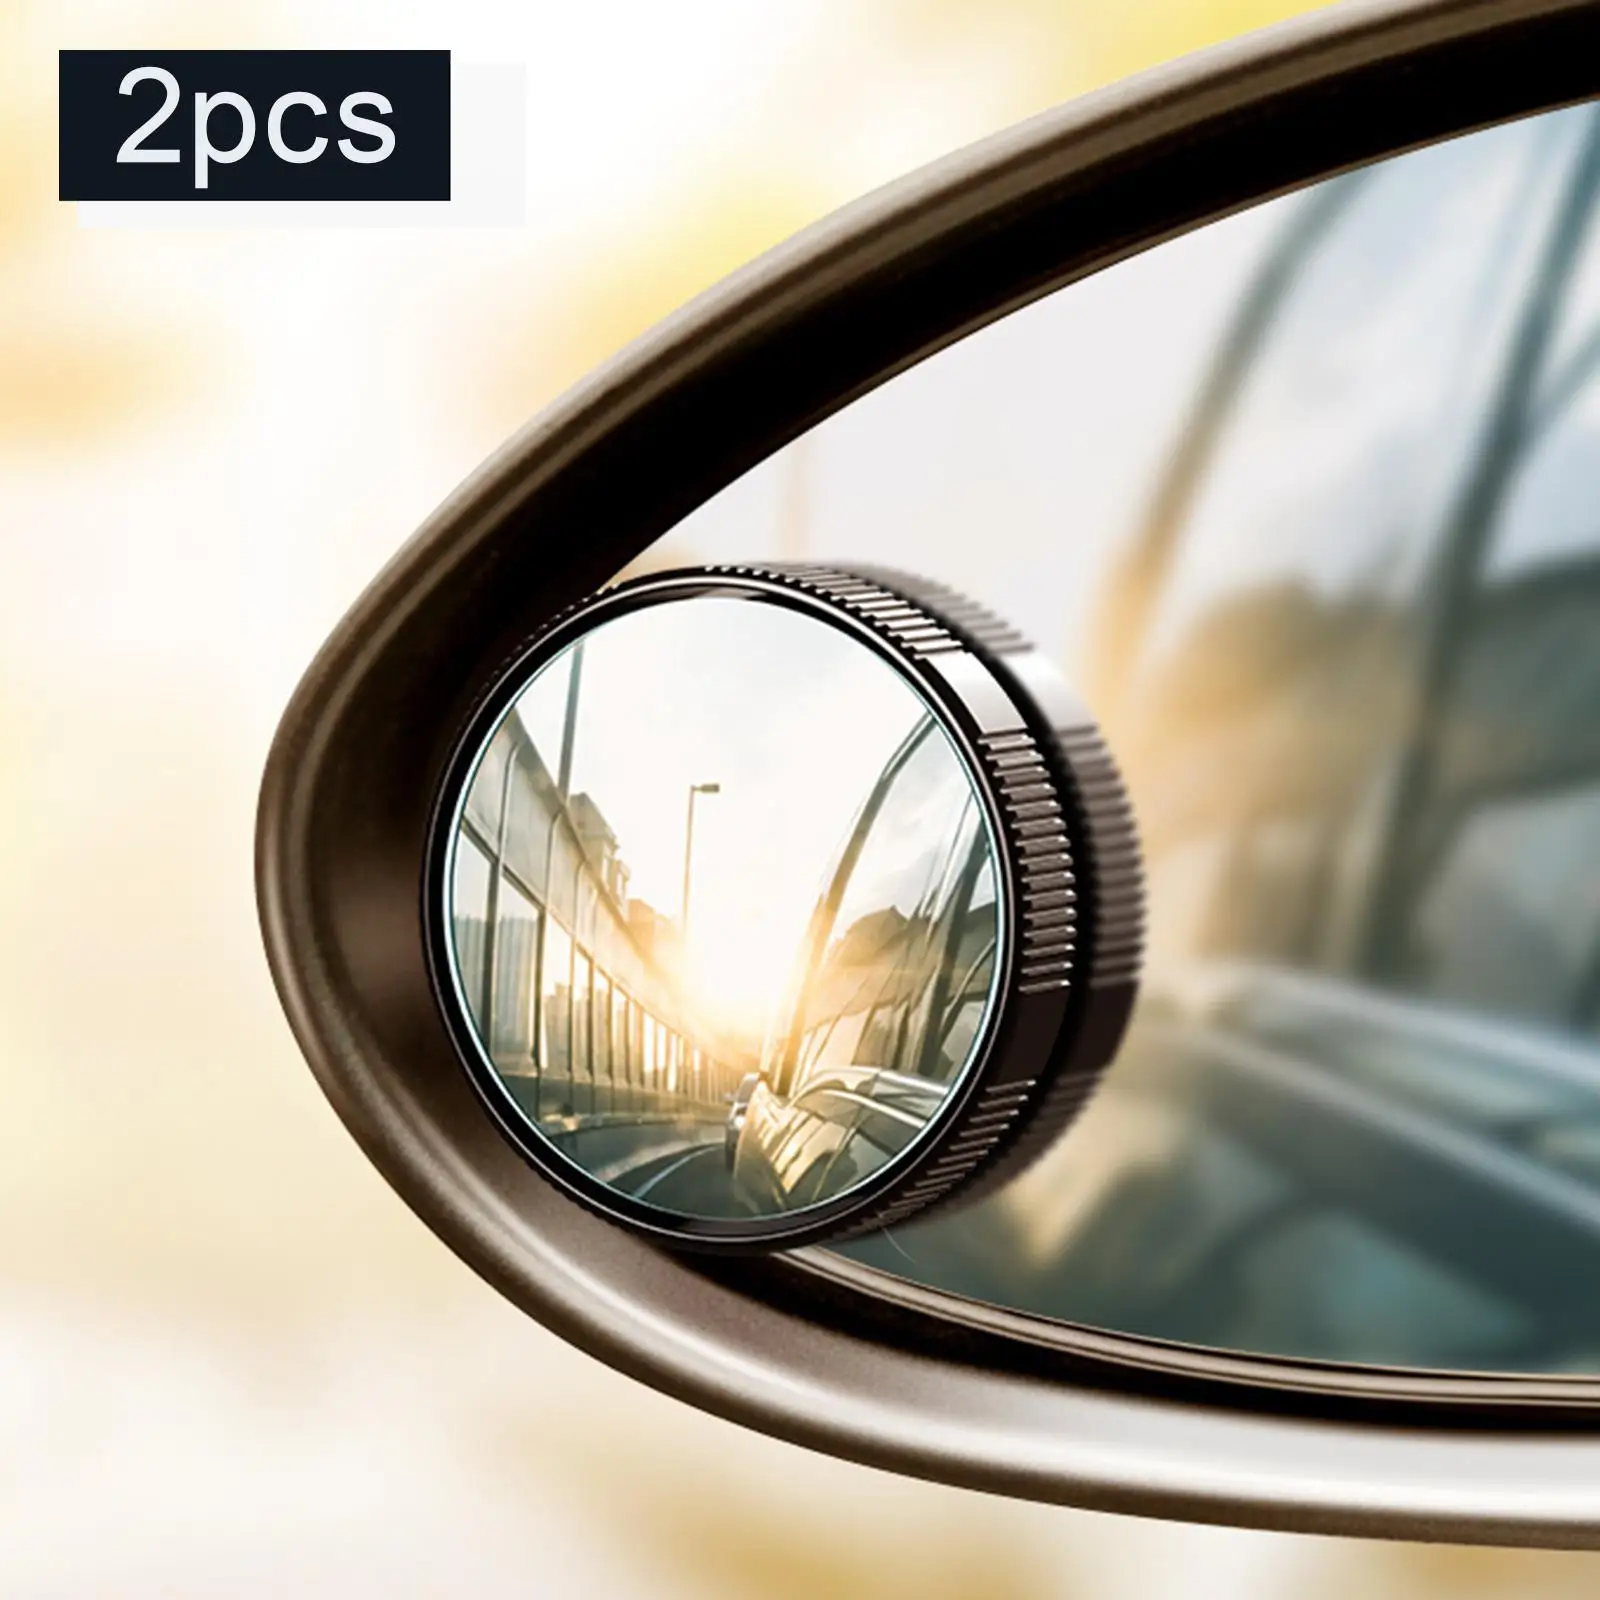 2x Blind Spot Mirrors Adjustable Rearview Mirror 360 Wide Angle ABS Housing HD Glass Convex Mirror for Cars SUV Trucks